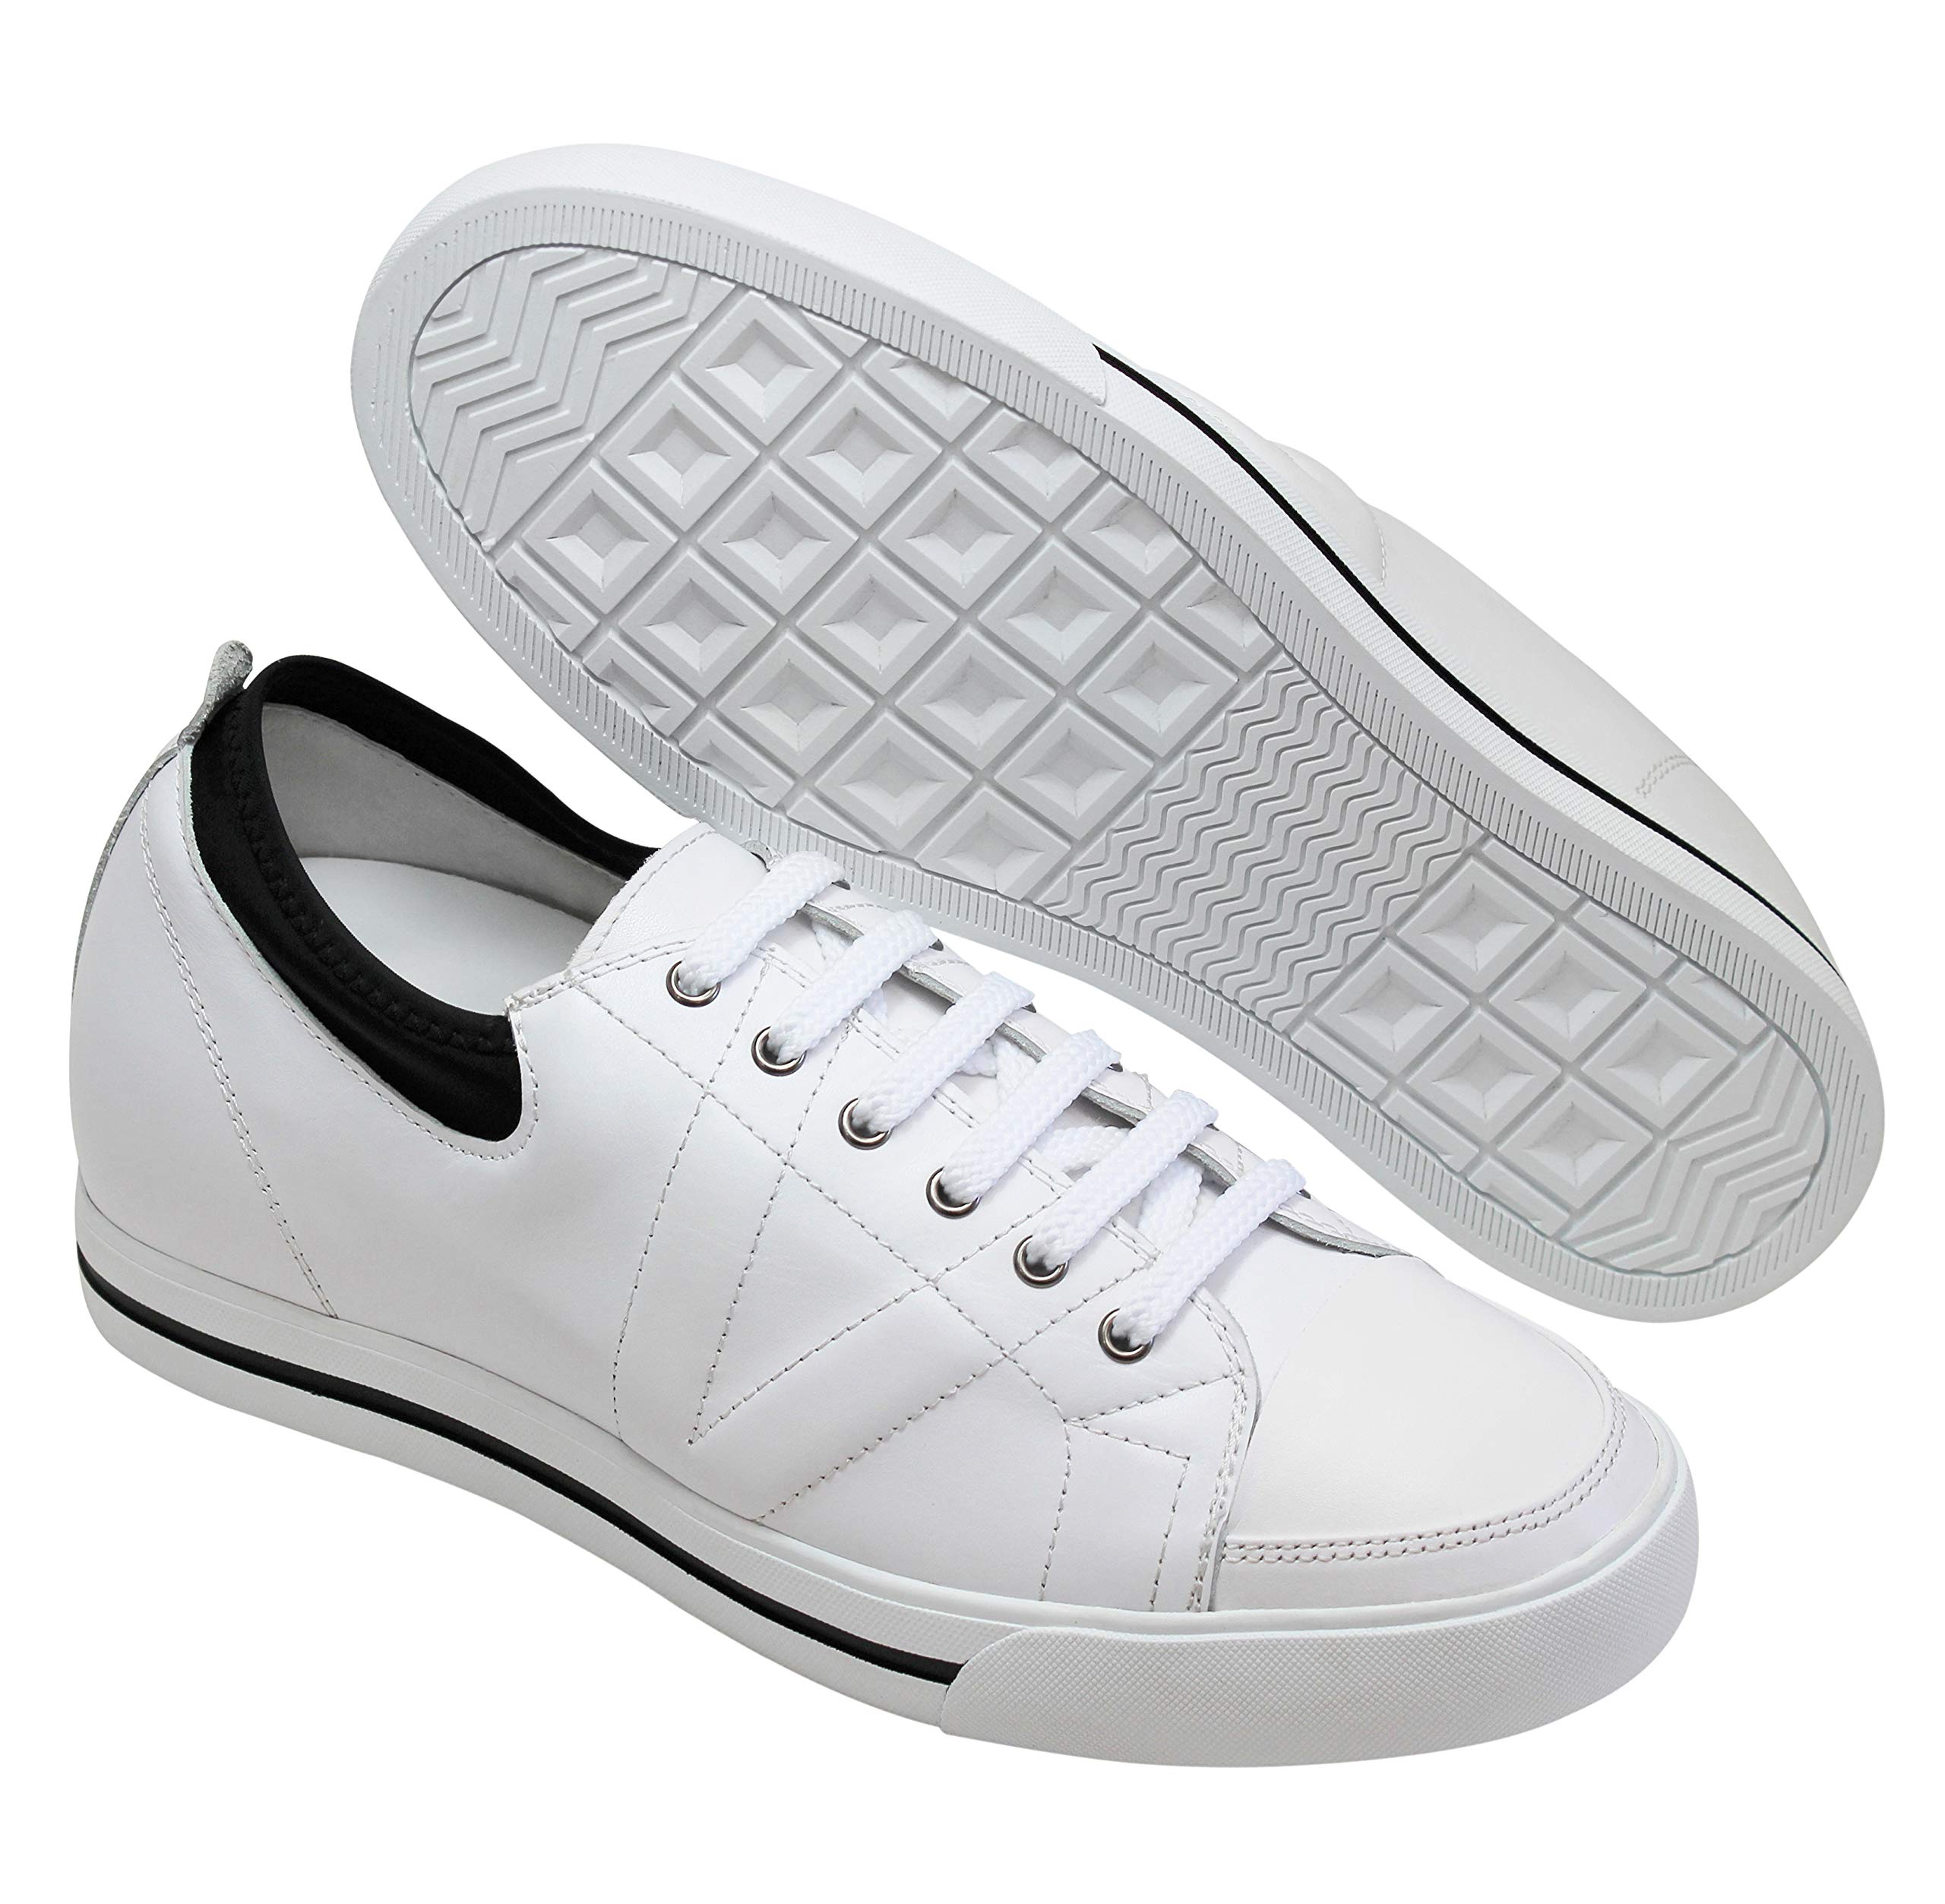 TOTO Men's Invisible Height Increasing Elevator Shoes - White/Black Leather Lace-up Sneakers - 2.4 Inches Taller - D8171